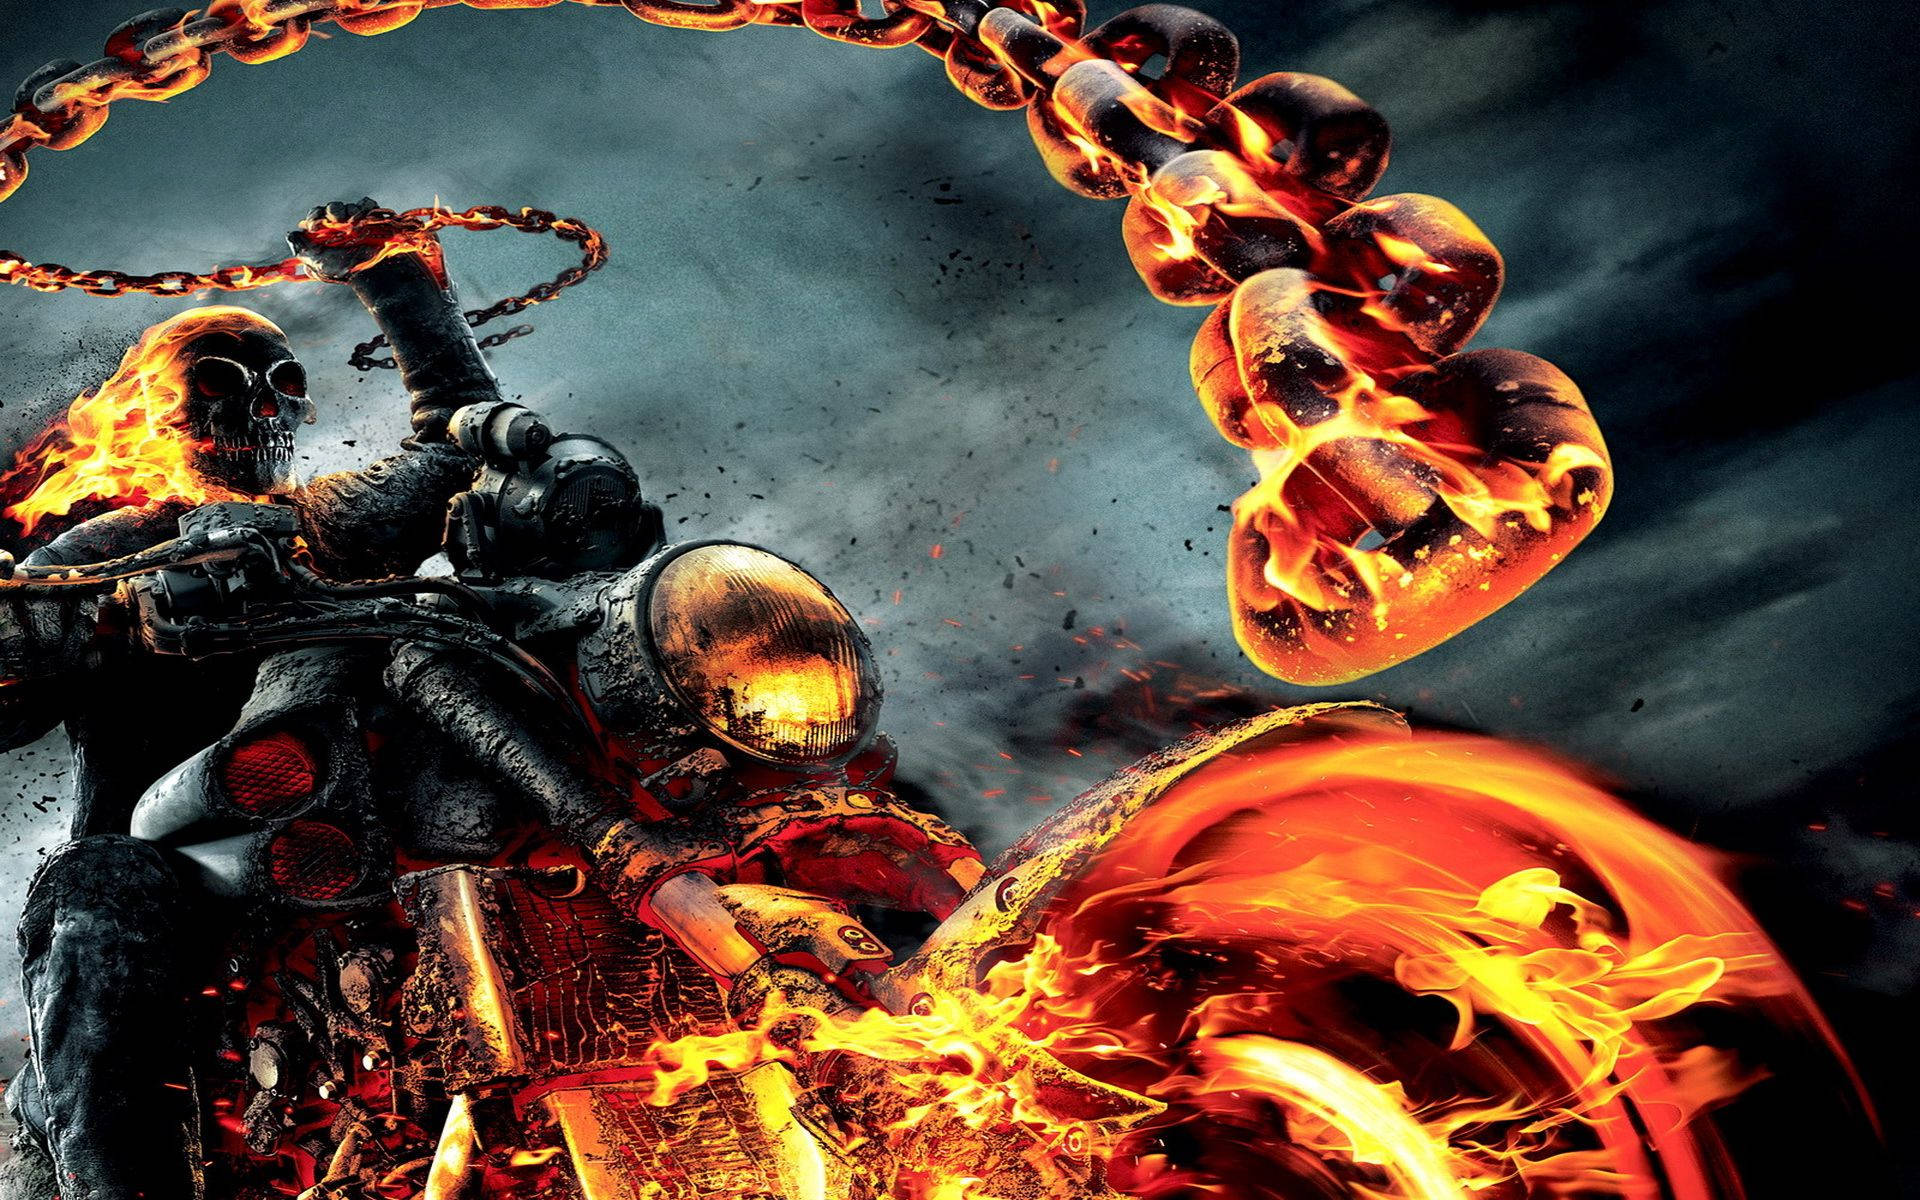 Cool 3d Ghost Rider With Infernal Chain Background